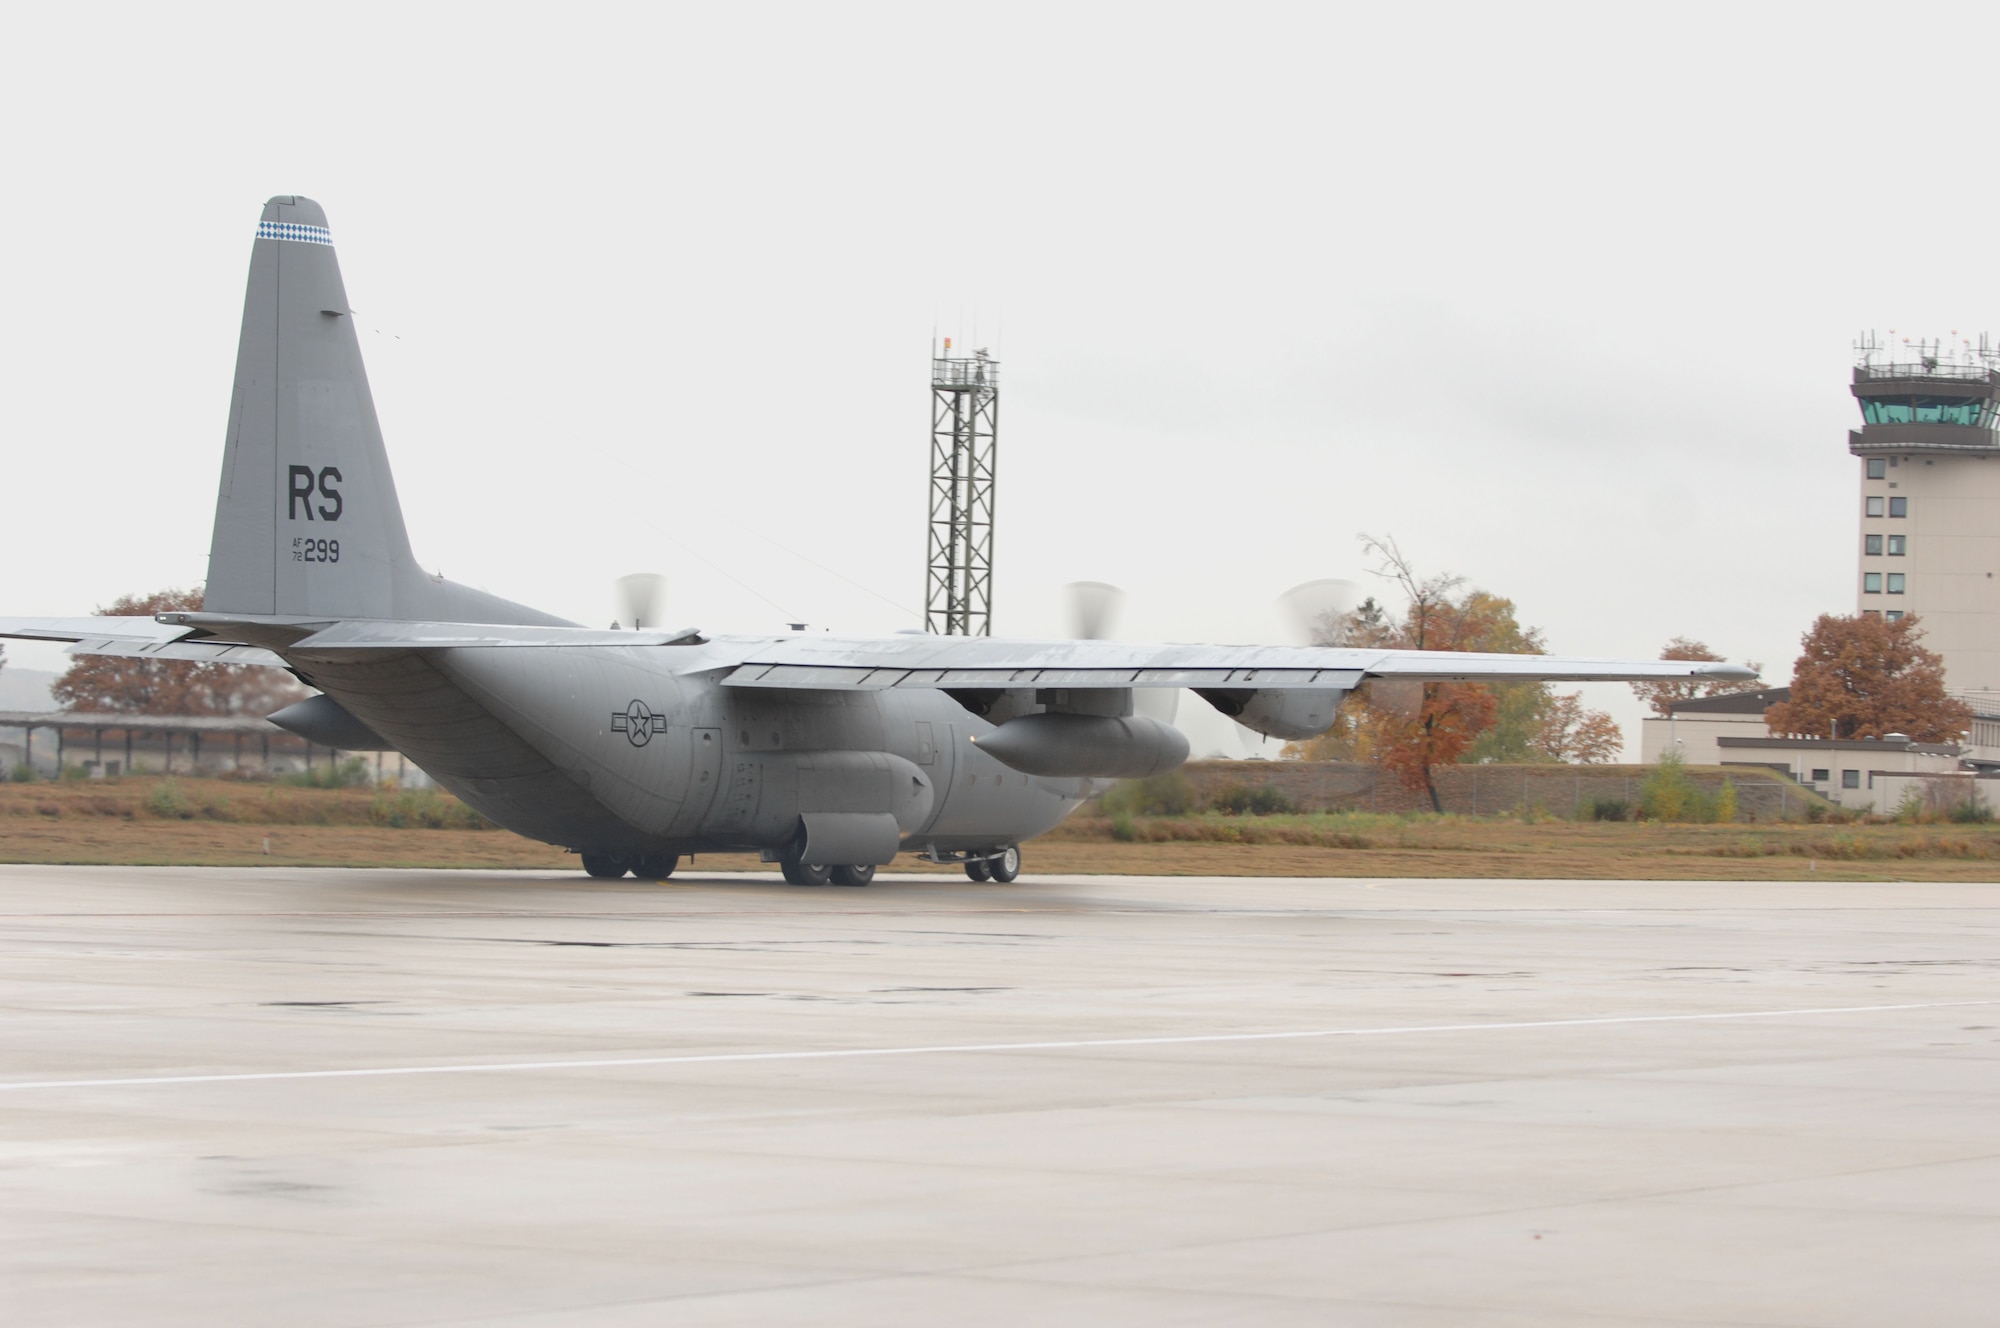 Ramstein's last C-130E Hercules prepares to take off for its final departure from Ramstein Air Base, Germany, Nov. 2, 2009. The C-130E Hercules has provided more than 40 years of airpower to U.S.  Air Forces in Europe, and is being replaced with the new C-130J Super Hercules as part of the revitalization of the Air Force fleet. (U.S. Air Force photo by Airman 1st Class Caleb Pierce)